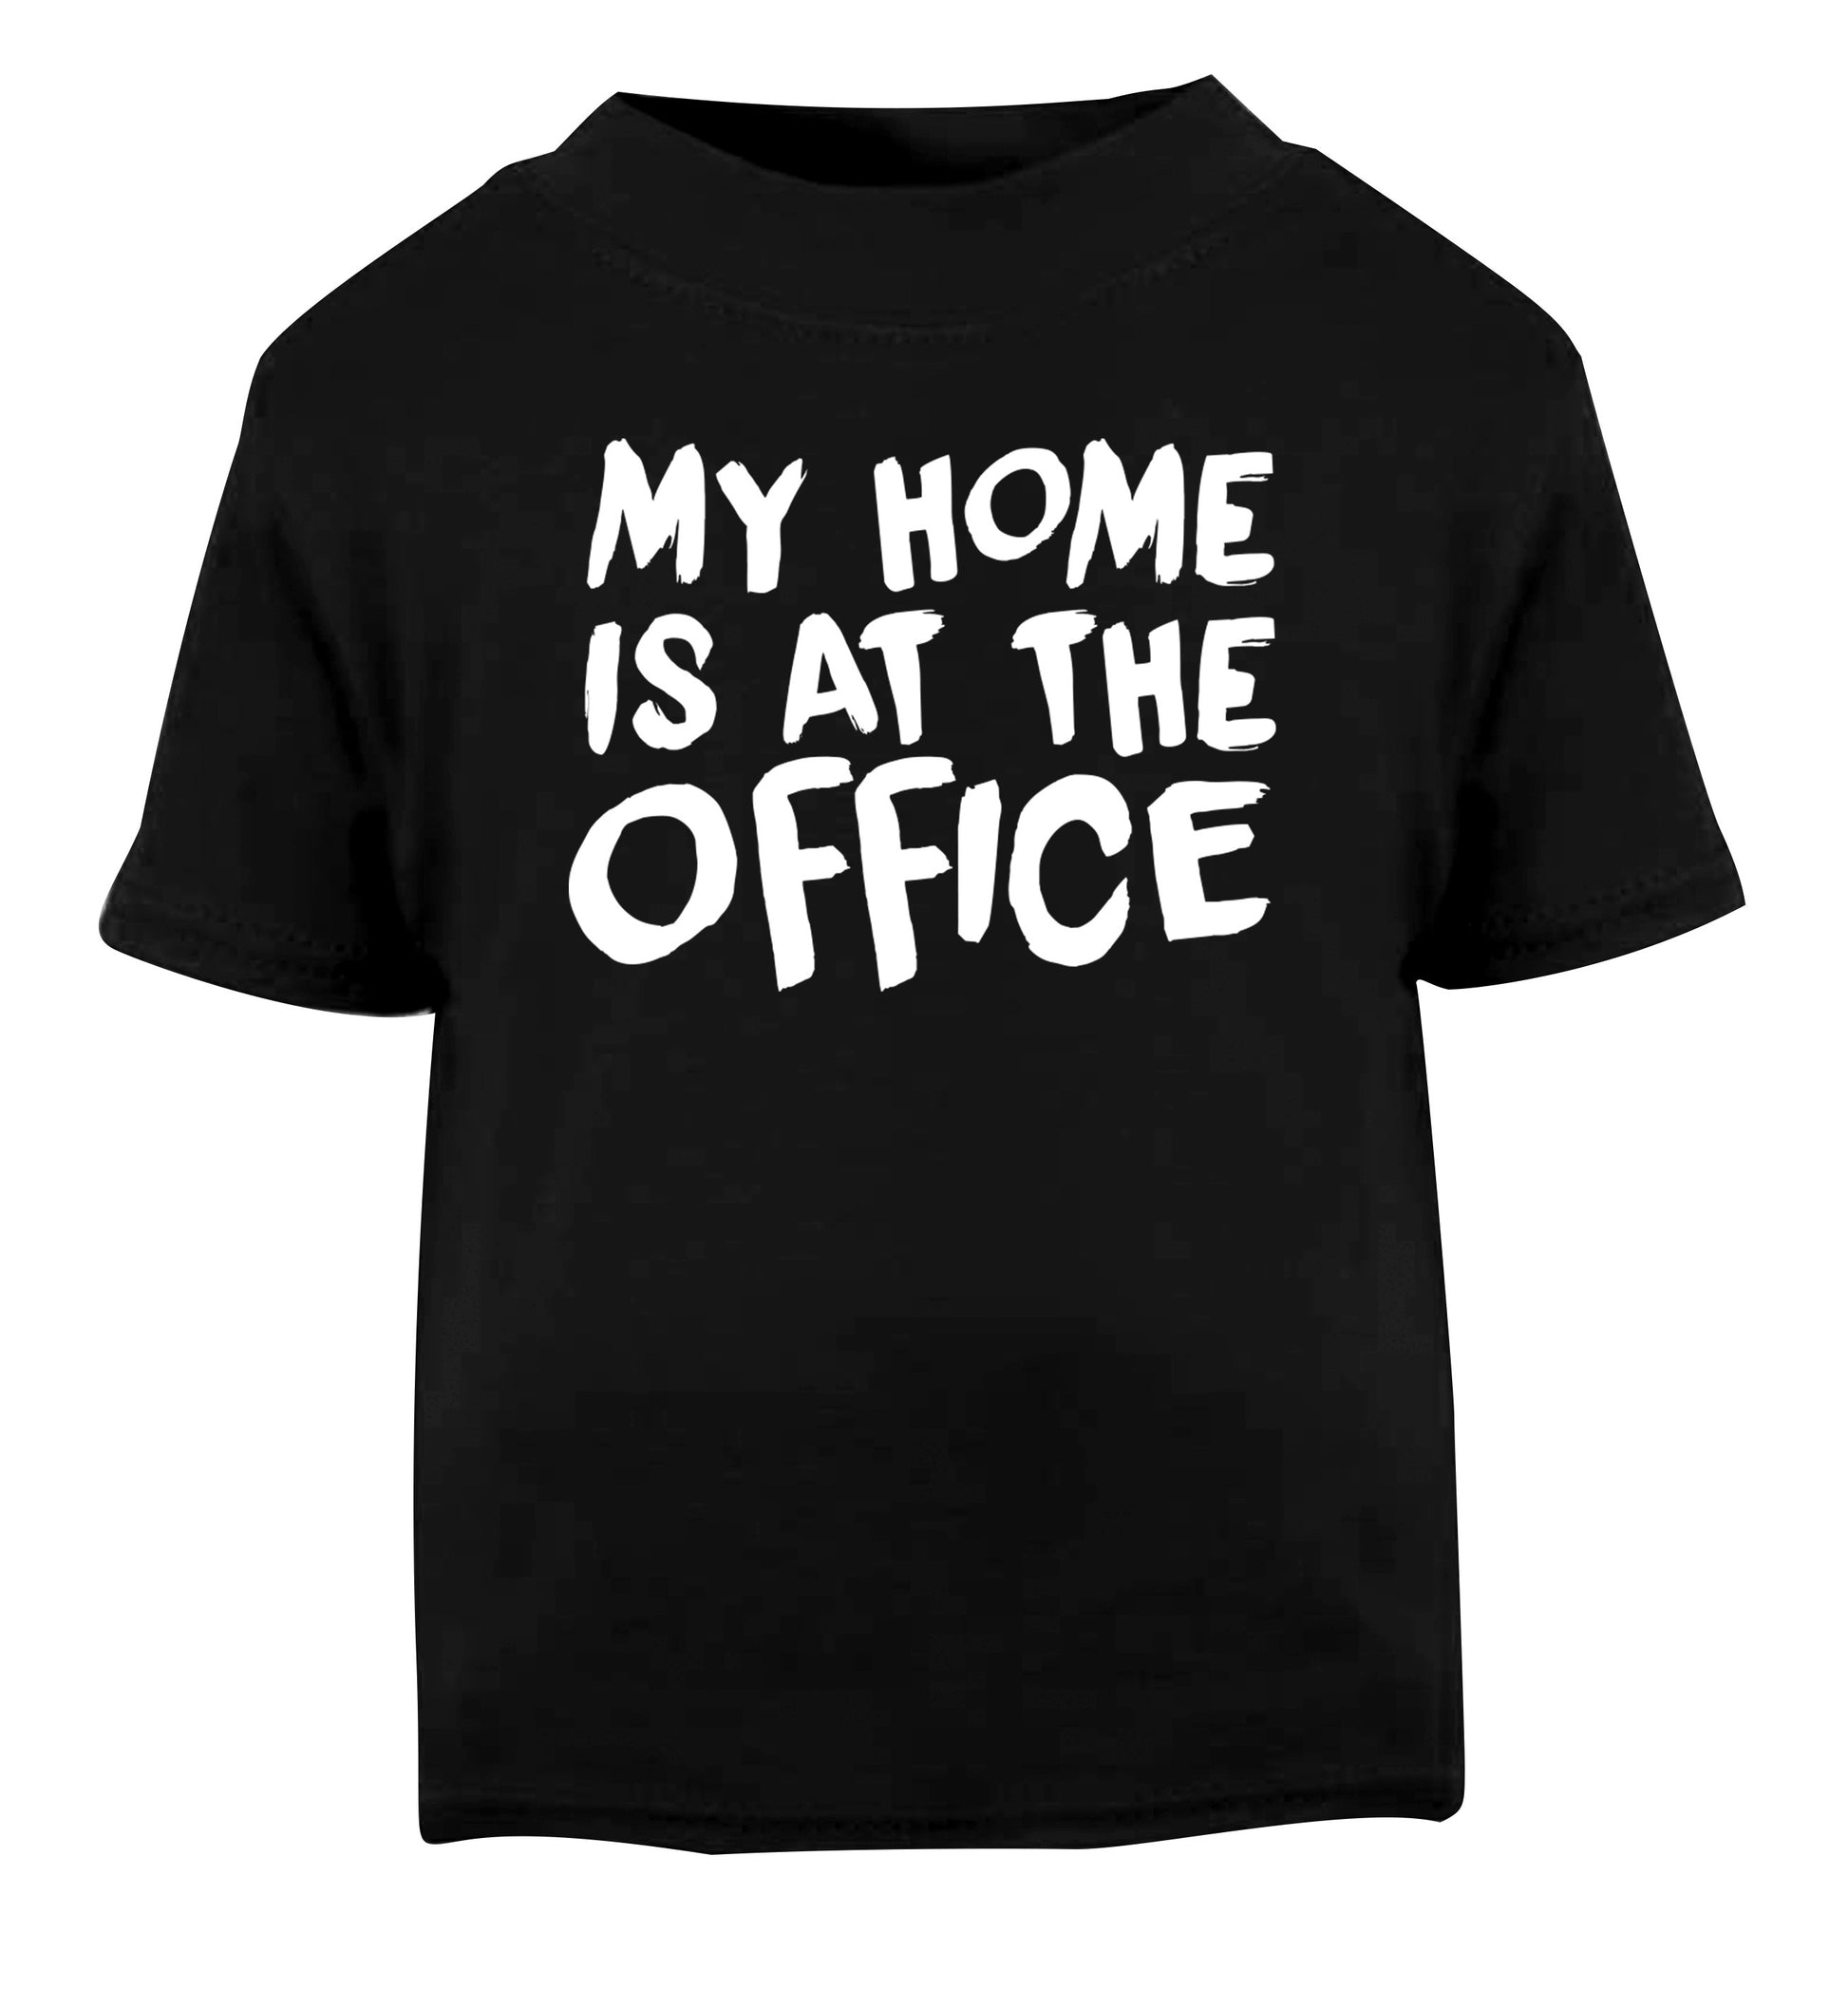 My home is at the office Black Baby Toddler Tshirt 2 years